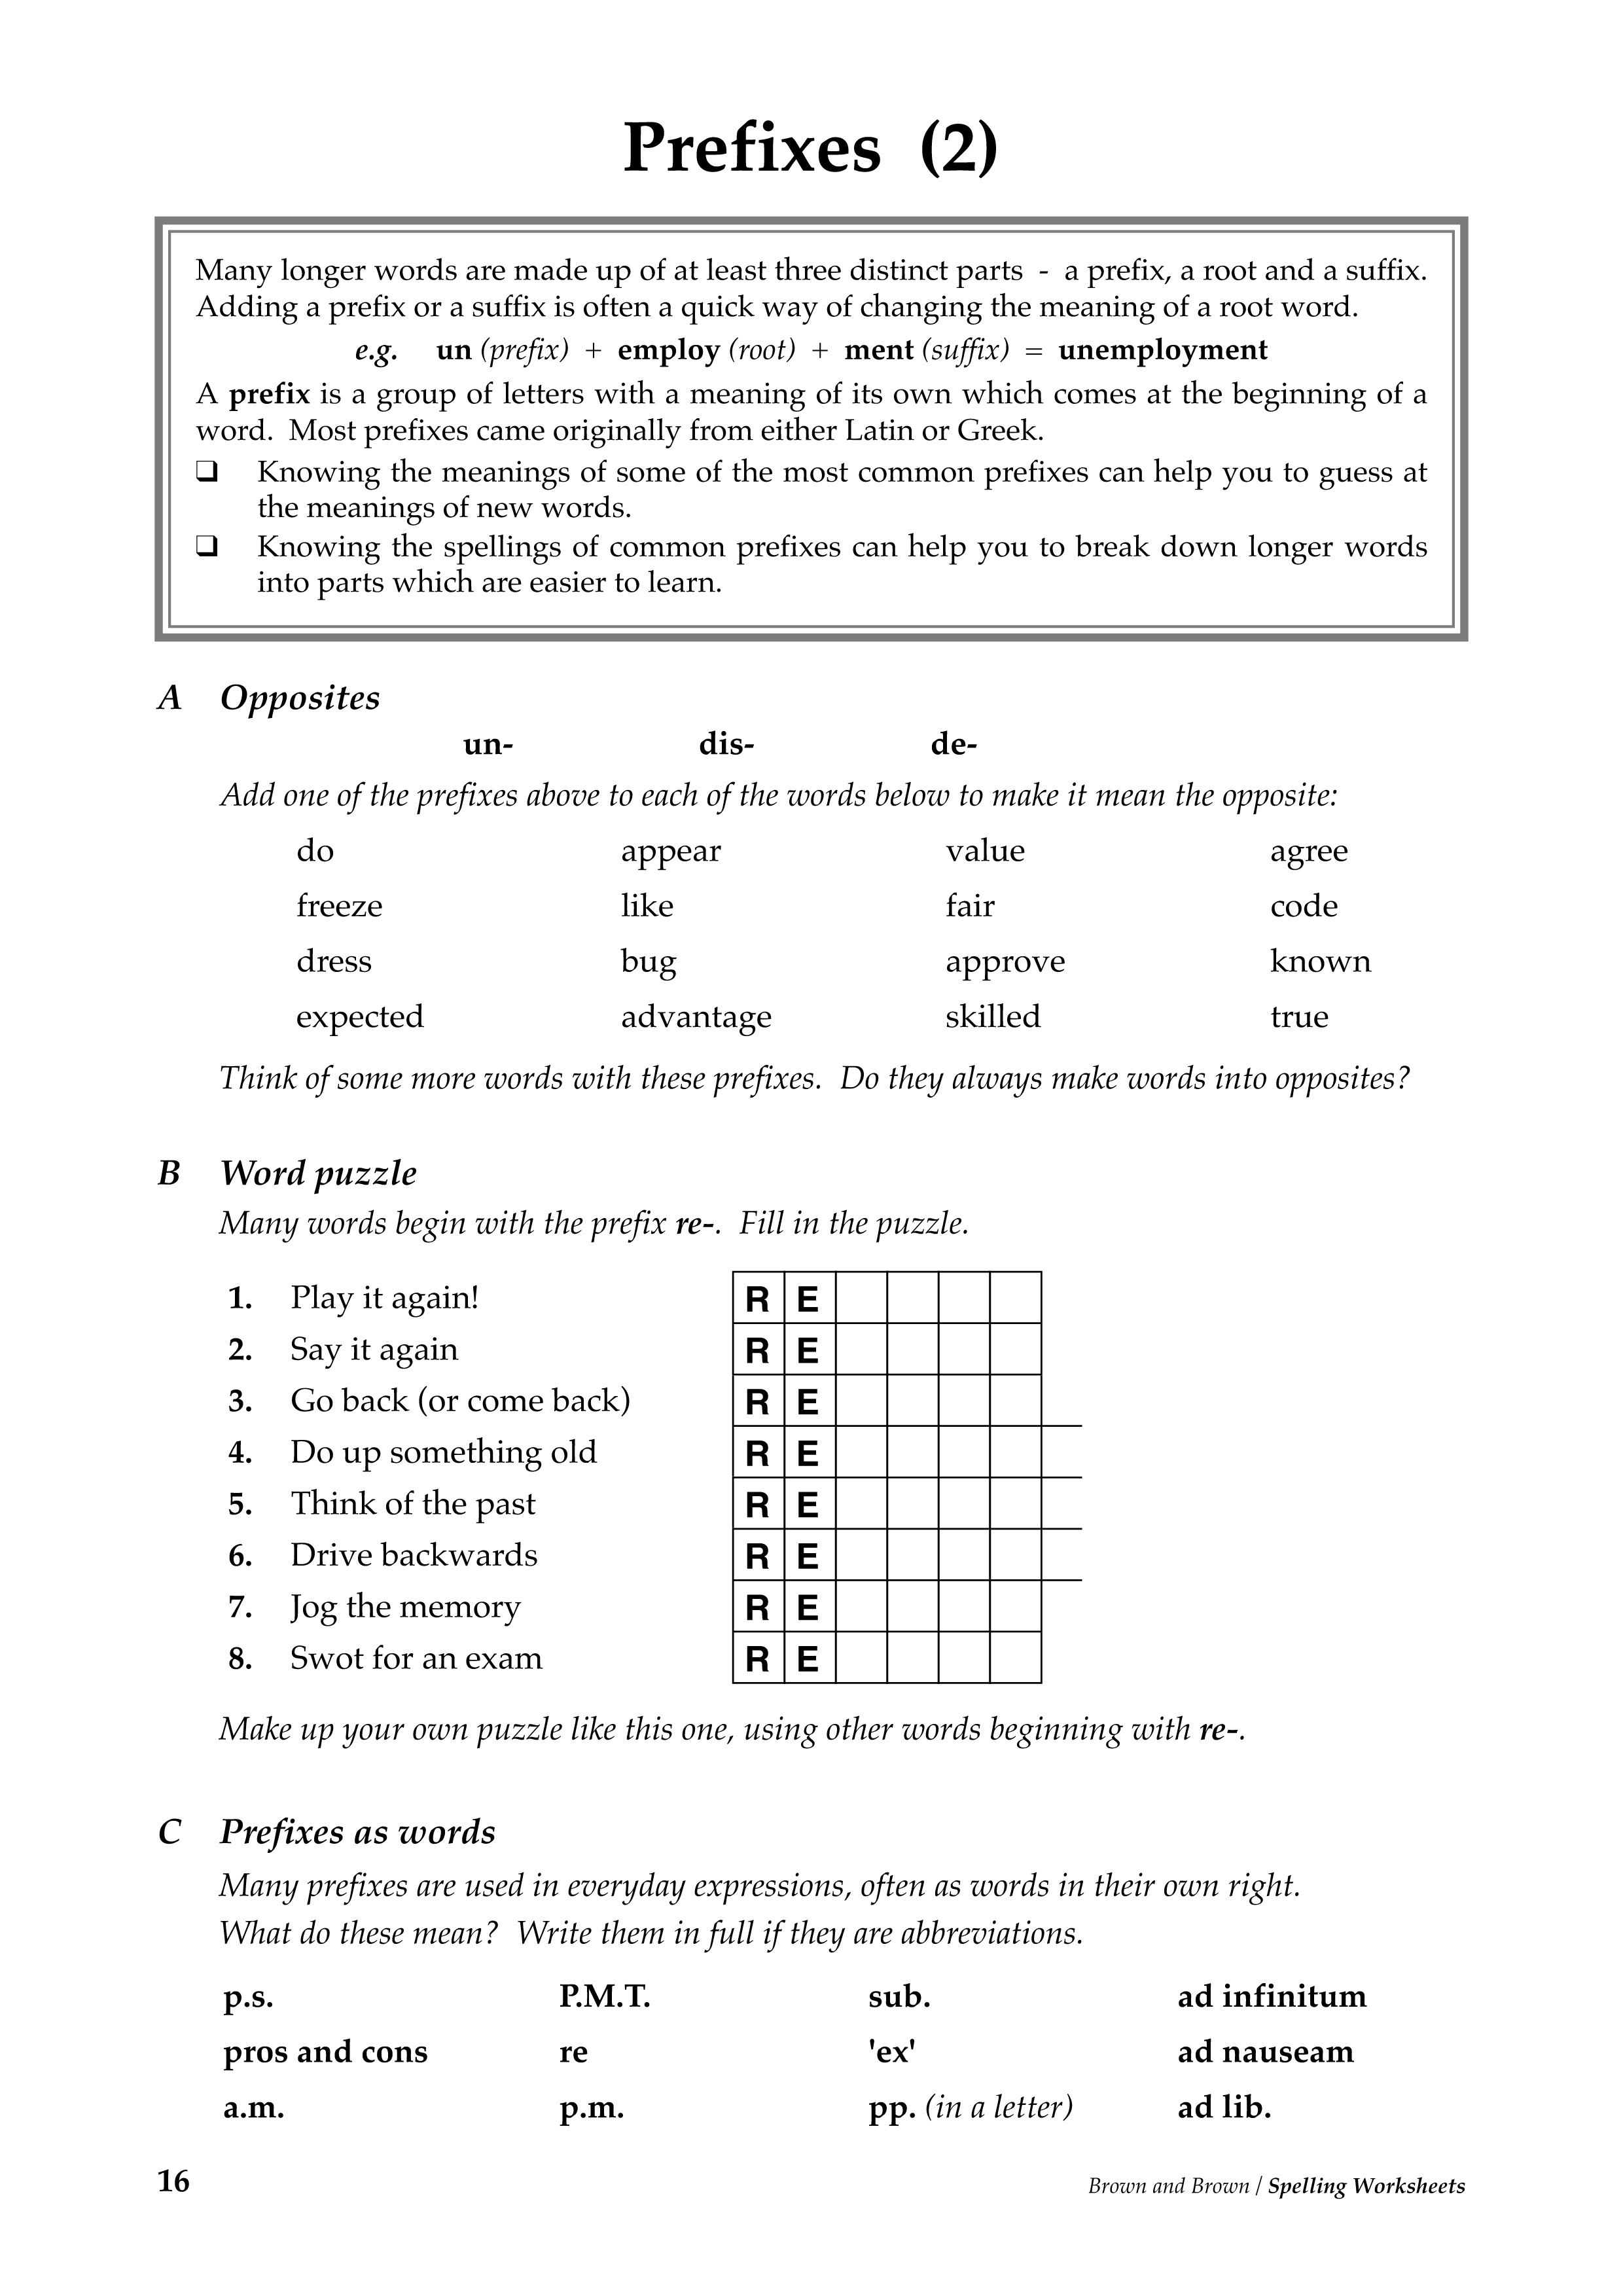 15-best-images-of-free-printable-dyslexia-worksheets-dyslexia-worksheets-for-kids-adult